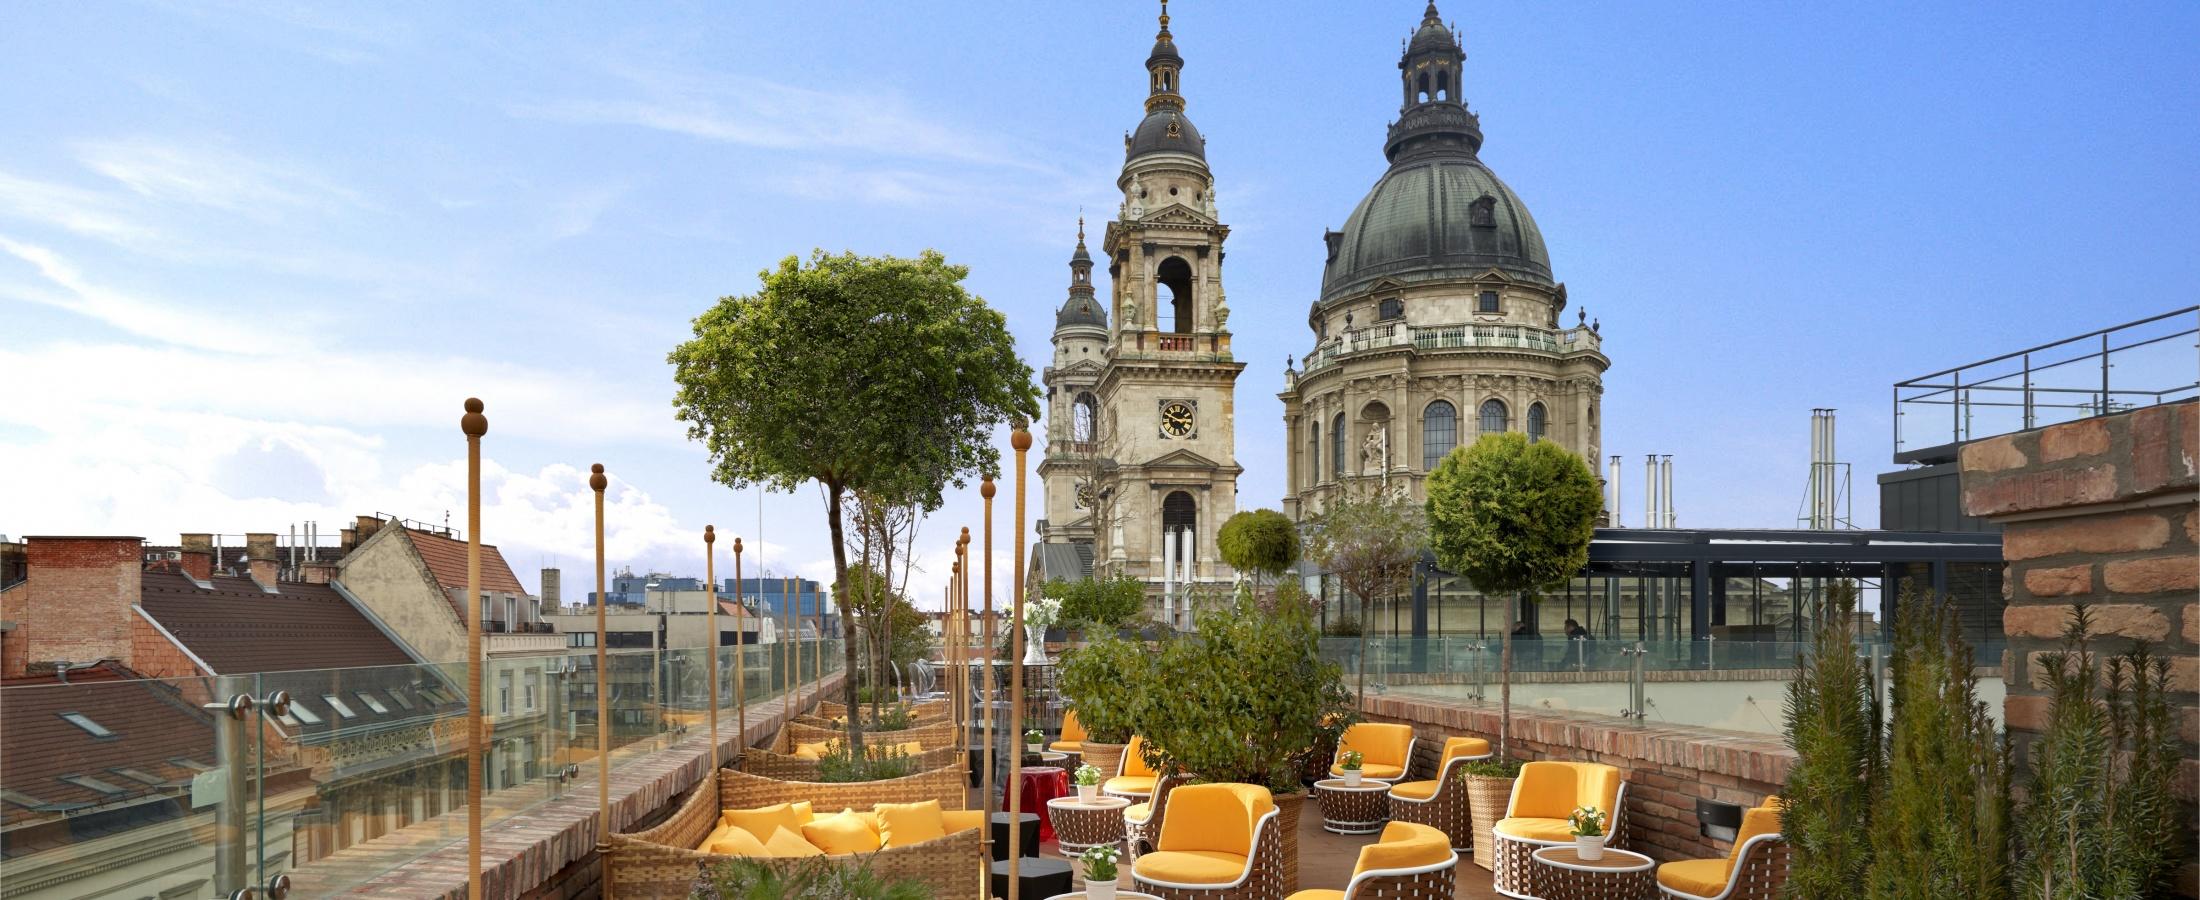 High Note SkyBar at Aria Hotel Budapest offers gorgeous views of the city and St. Stephen's Basilica.